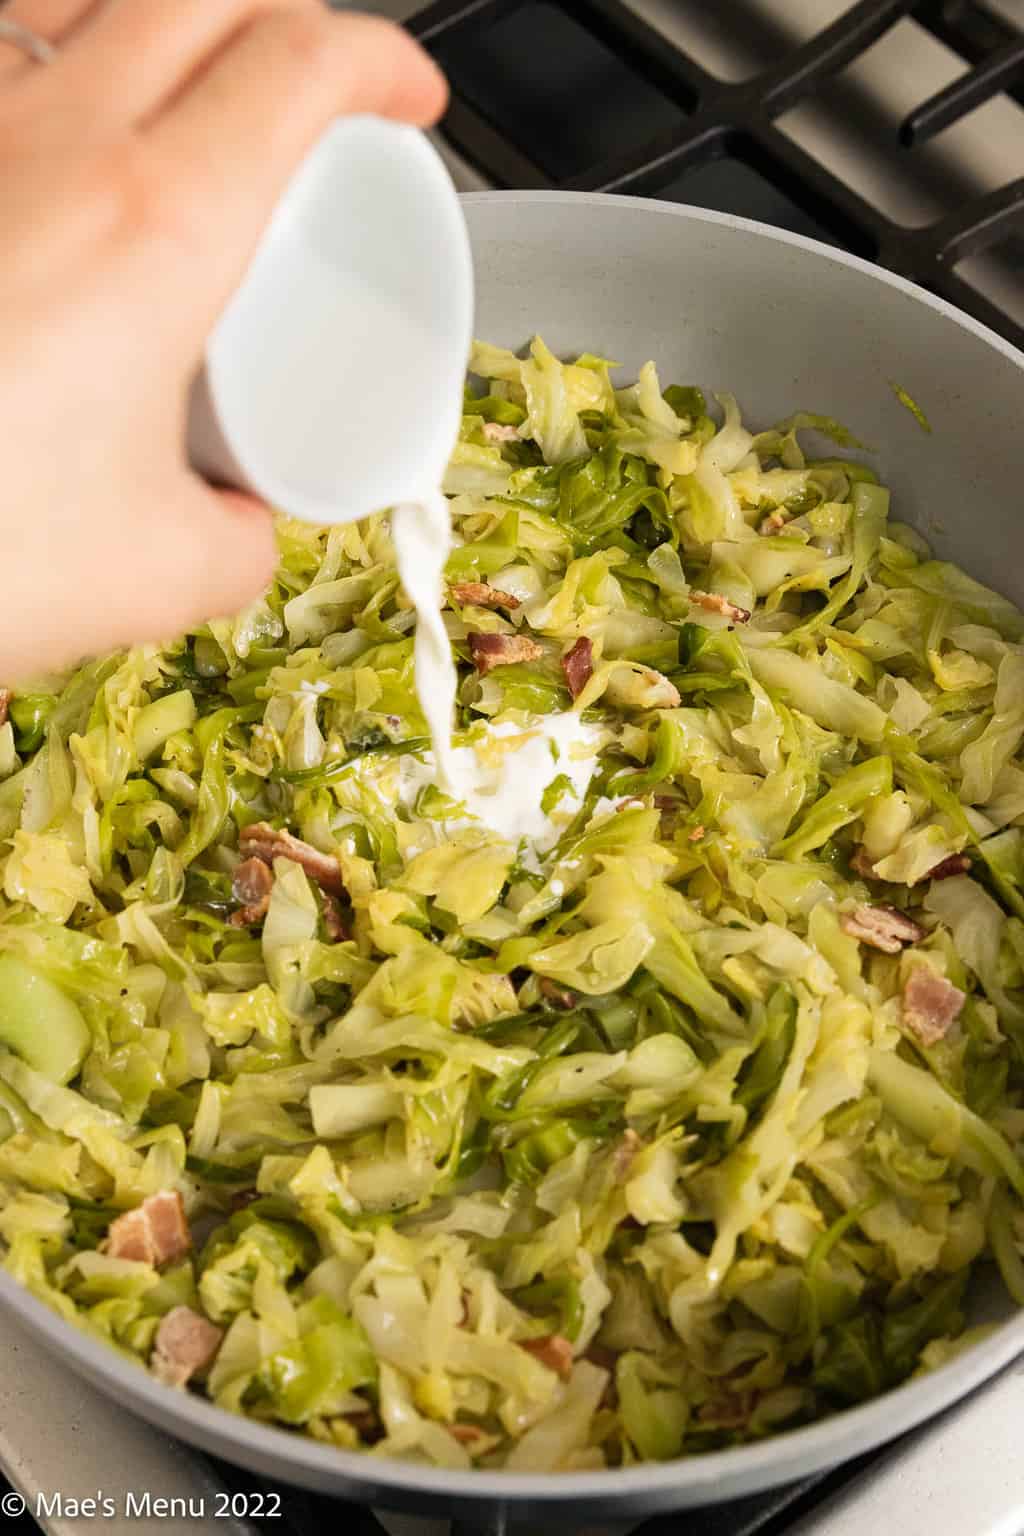 Pouring cream into a saute pan with cabbage and bacon.